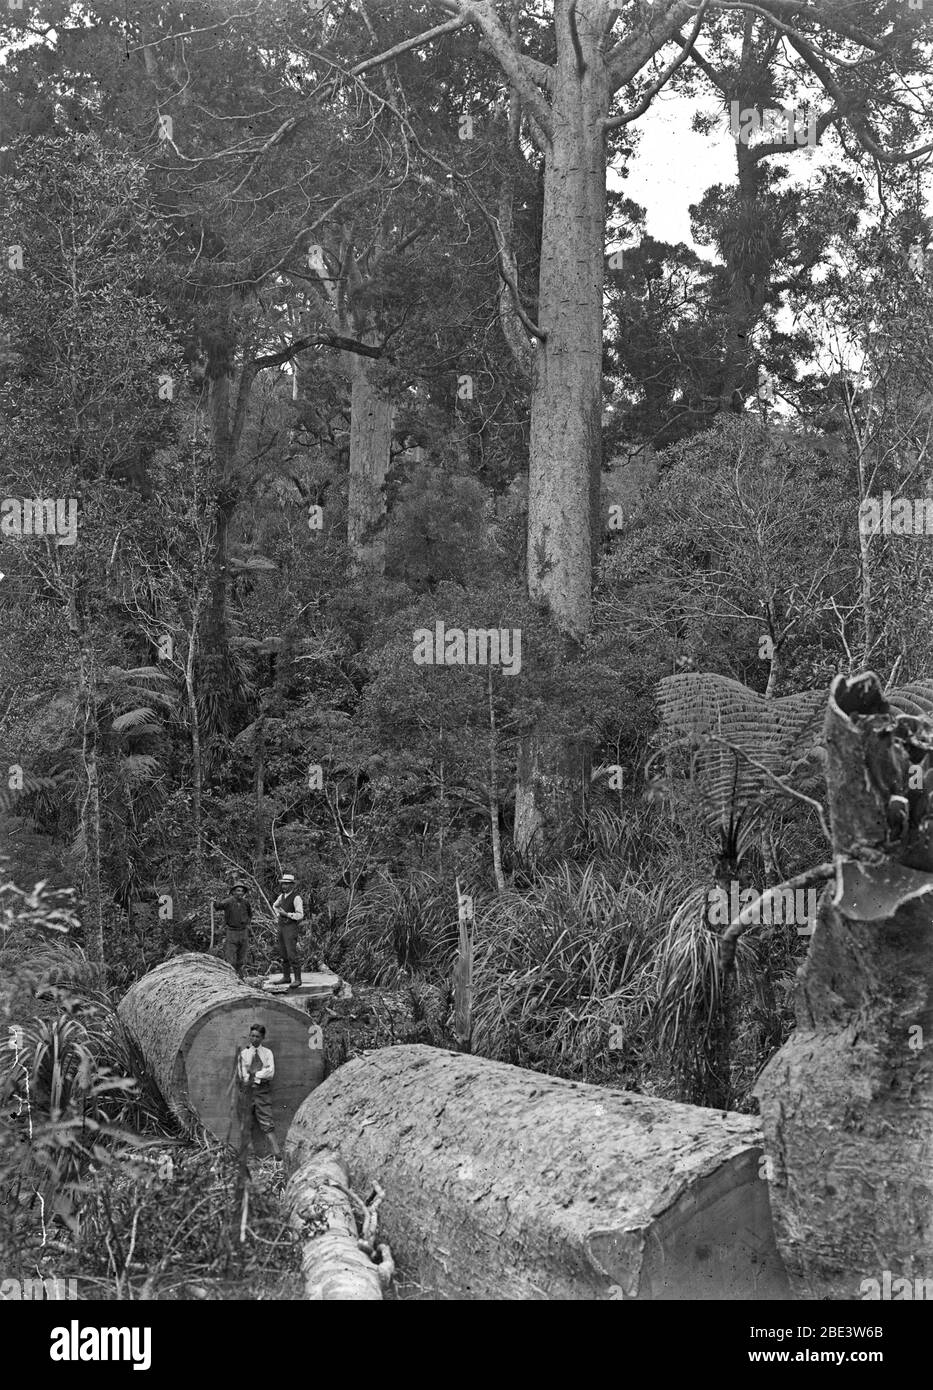 Men examine a fallen kauri tree in a stand of native bush near Piha in the North Island of New Zealand, circa 1915, by photographer Albert Percy Godber Stock Photo